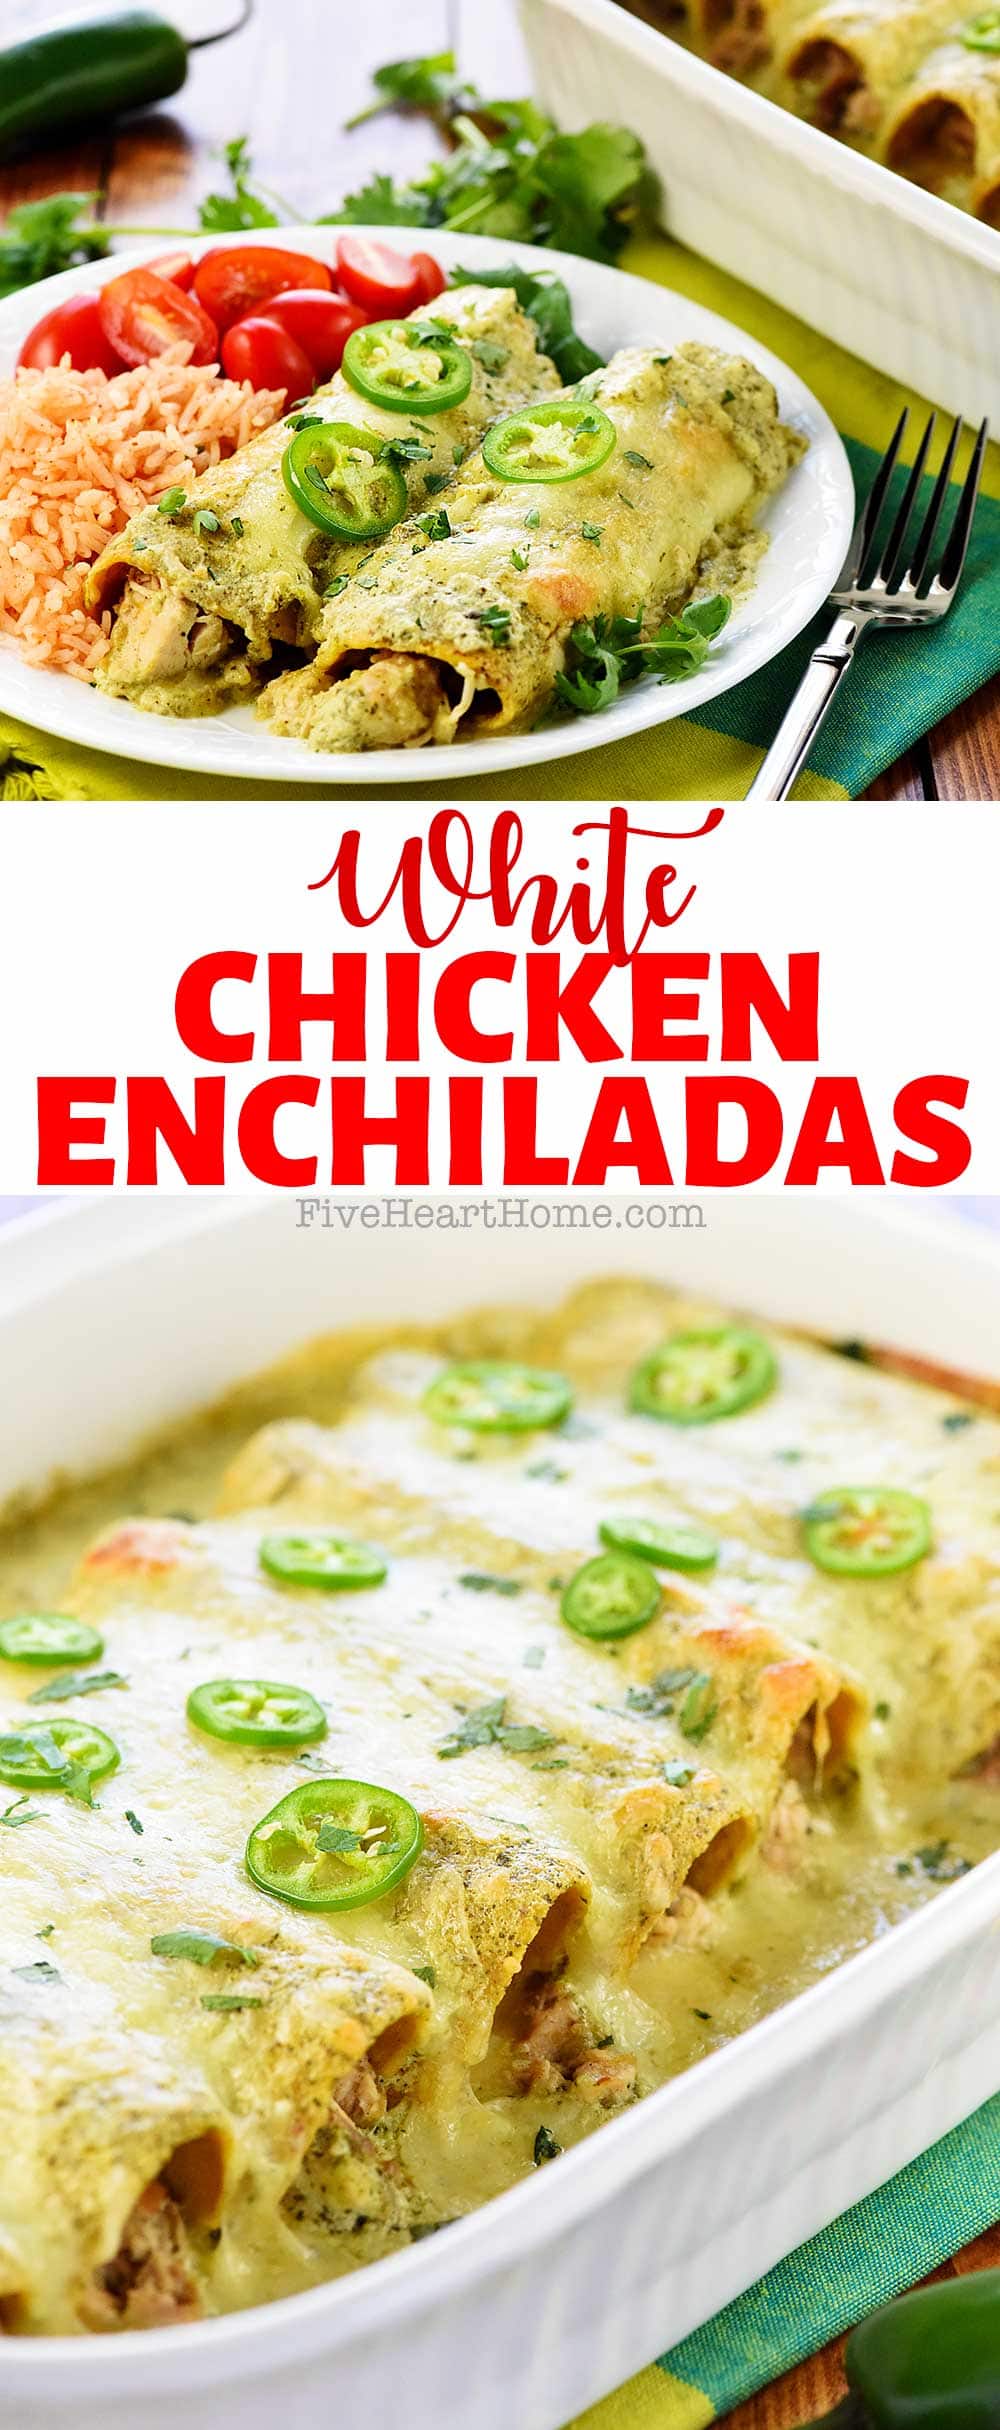 White Chicken Enchiladas ~ cheesy, flavorful, and smothered in homemade creamy jalapeño sauce (copycat of Chuy’s dip) for a dinner that’s sure to become a family favorite! | FiveHeartHome.com via @fivehearthome